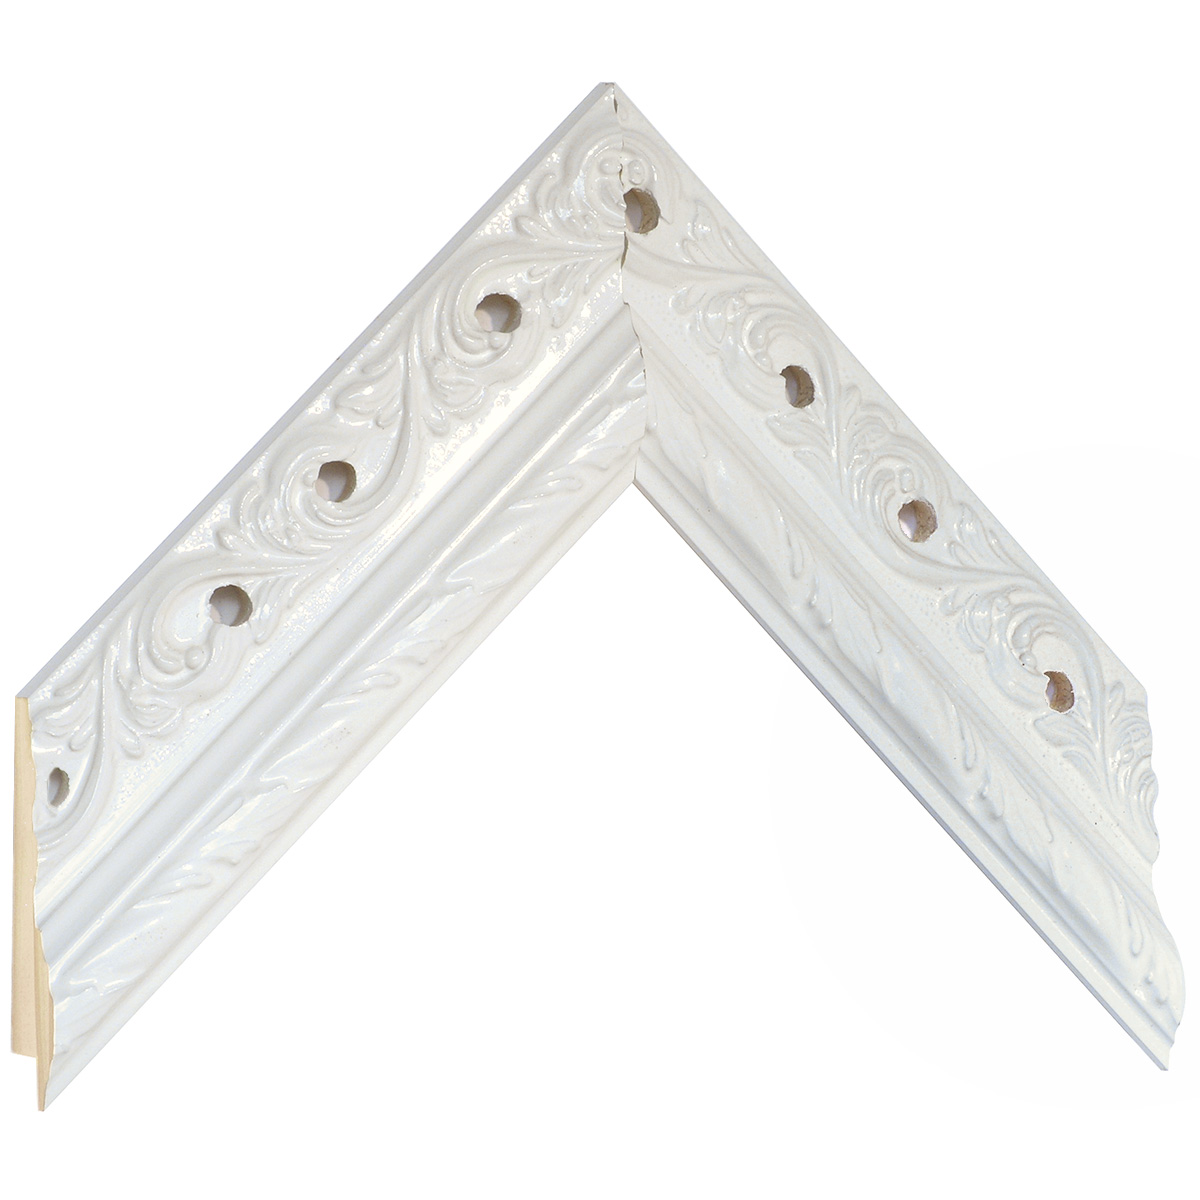 Moulding finger-jointed pine 48mm wide - white, holes and decoratiions - Sample